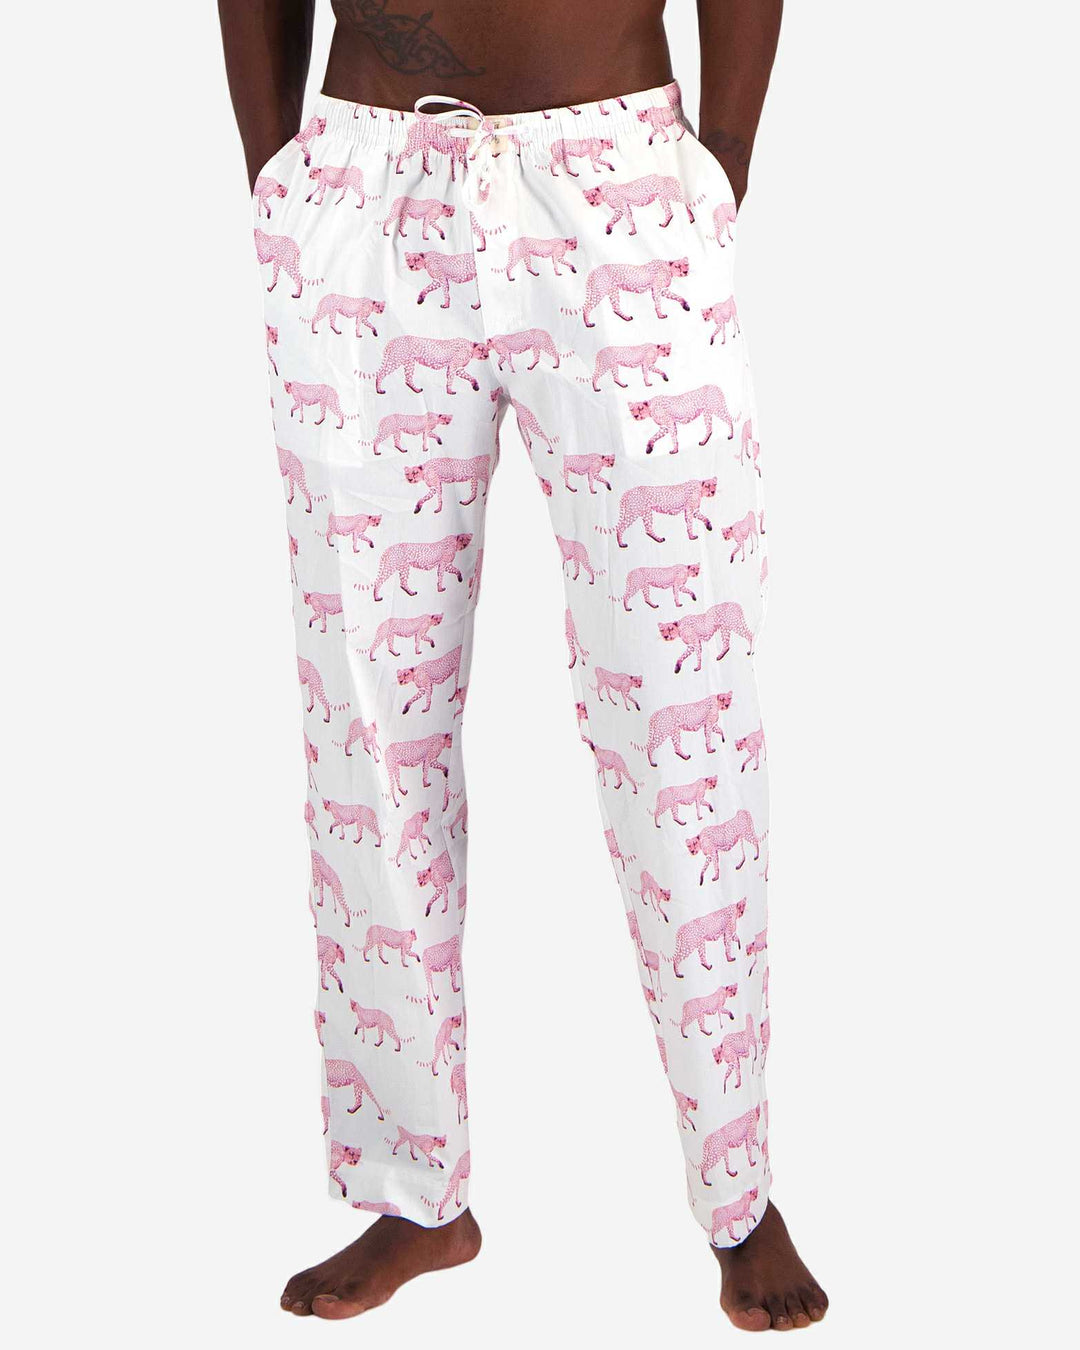 Mens lounge pants with with pink cheetahs